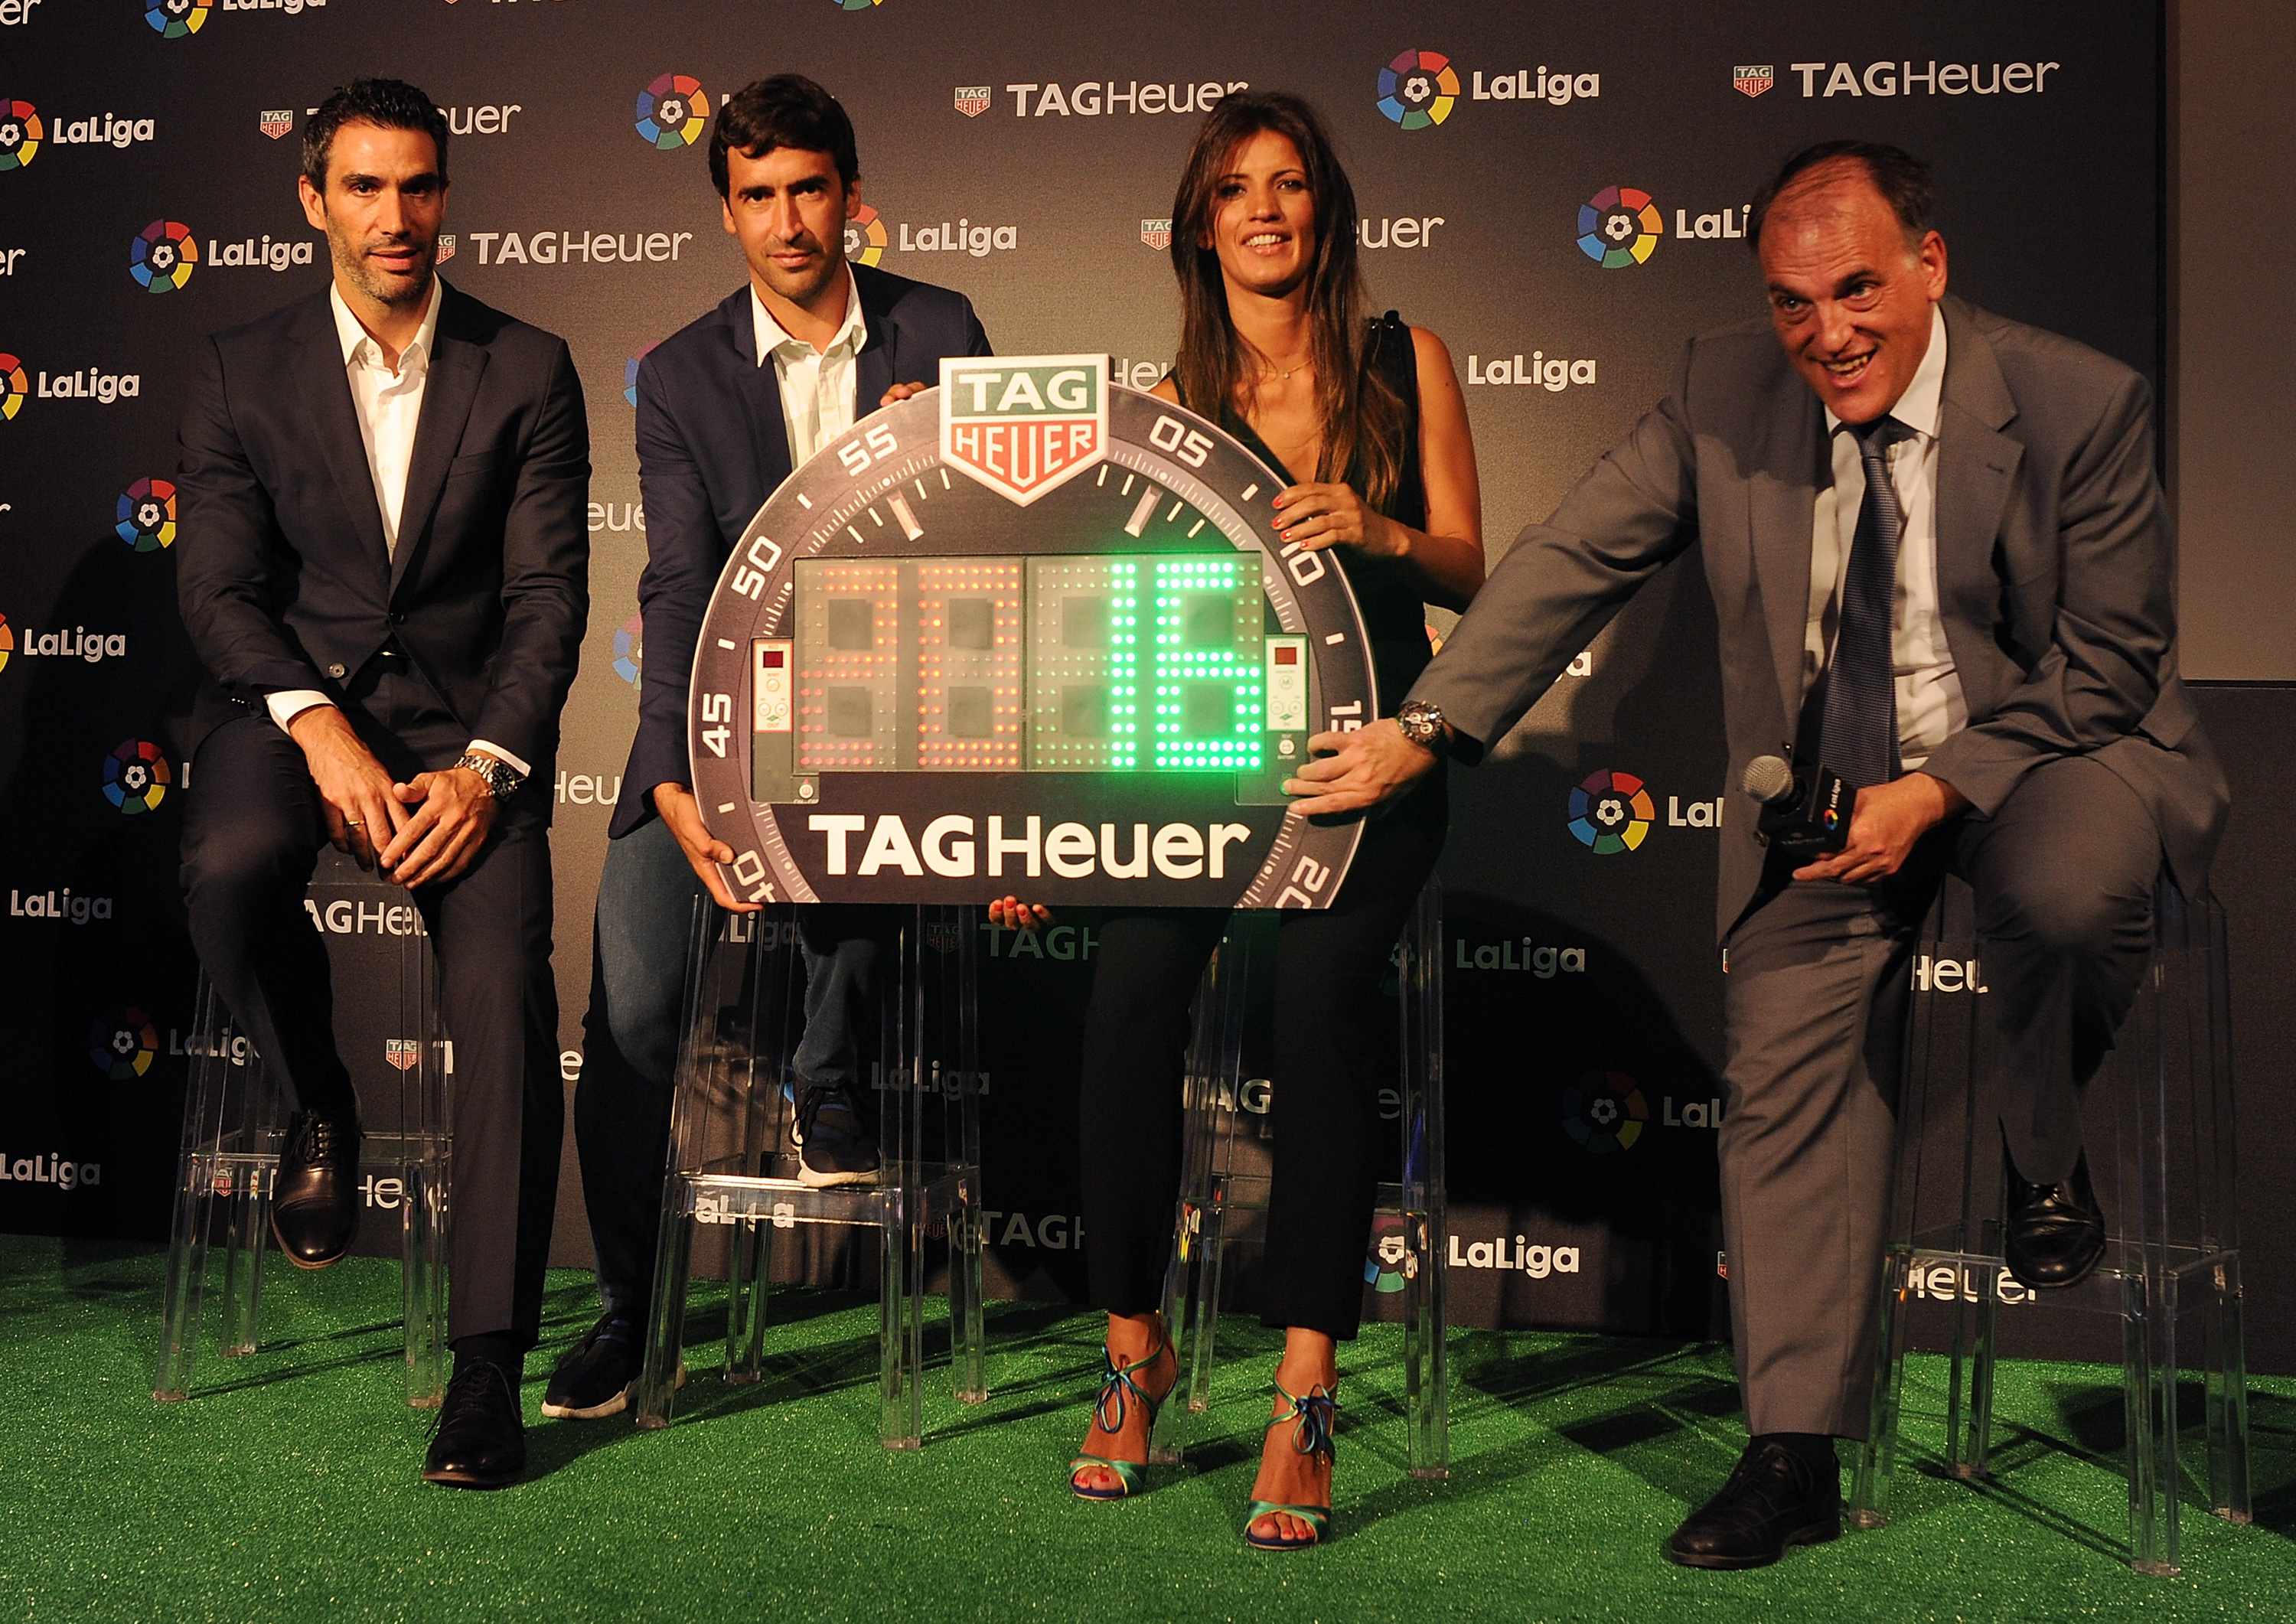 MADRID, SPAIN - JULY 13: (From L to R) Former players Fernando Sanz and Raul Gonzalez are accompanied by Blanca Panzano, Managing Director Spain of TAG Heuer and Javier Tebas, President of La Liga during the press conference to announce TAG Heuer as the Official Timekeeper and Official Sponsor of La Liga at the Royal Theatre on July 13, 2016 in Madrid, Spain. (Photo by Denis Doyle/Getty Images for Tag Heuer)